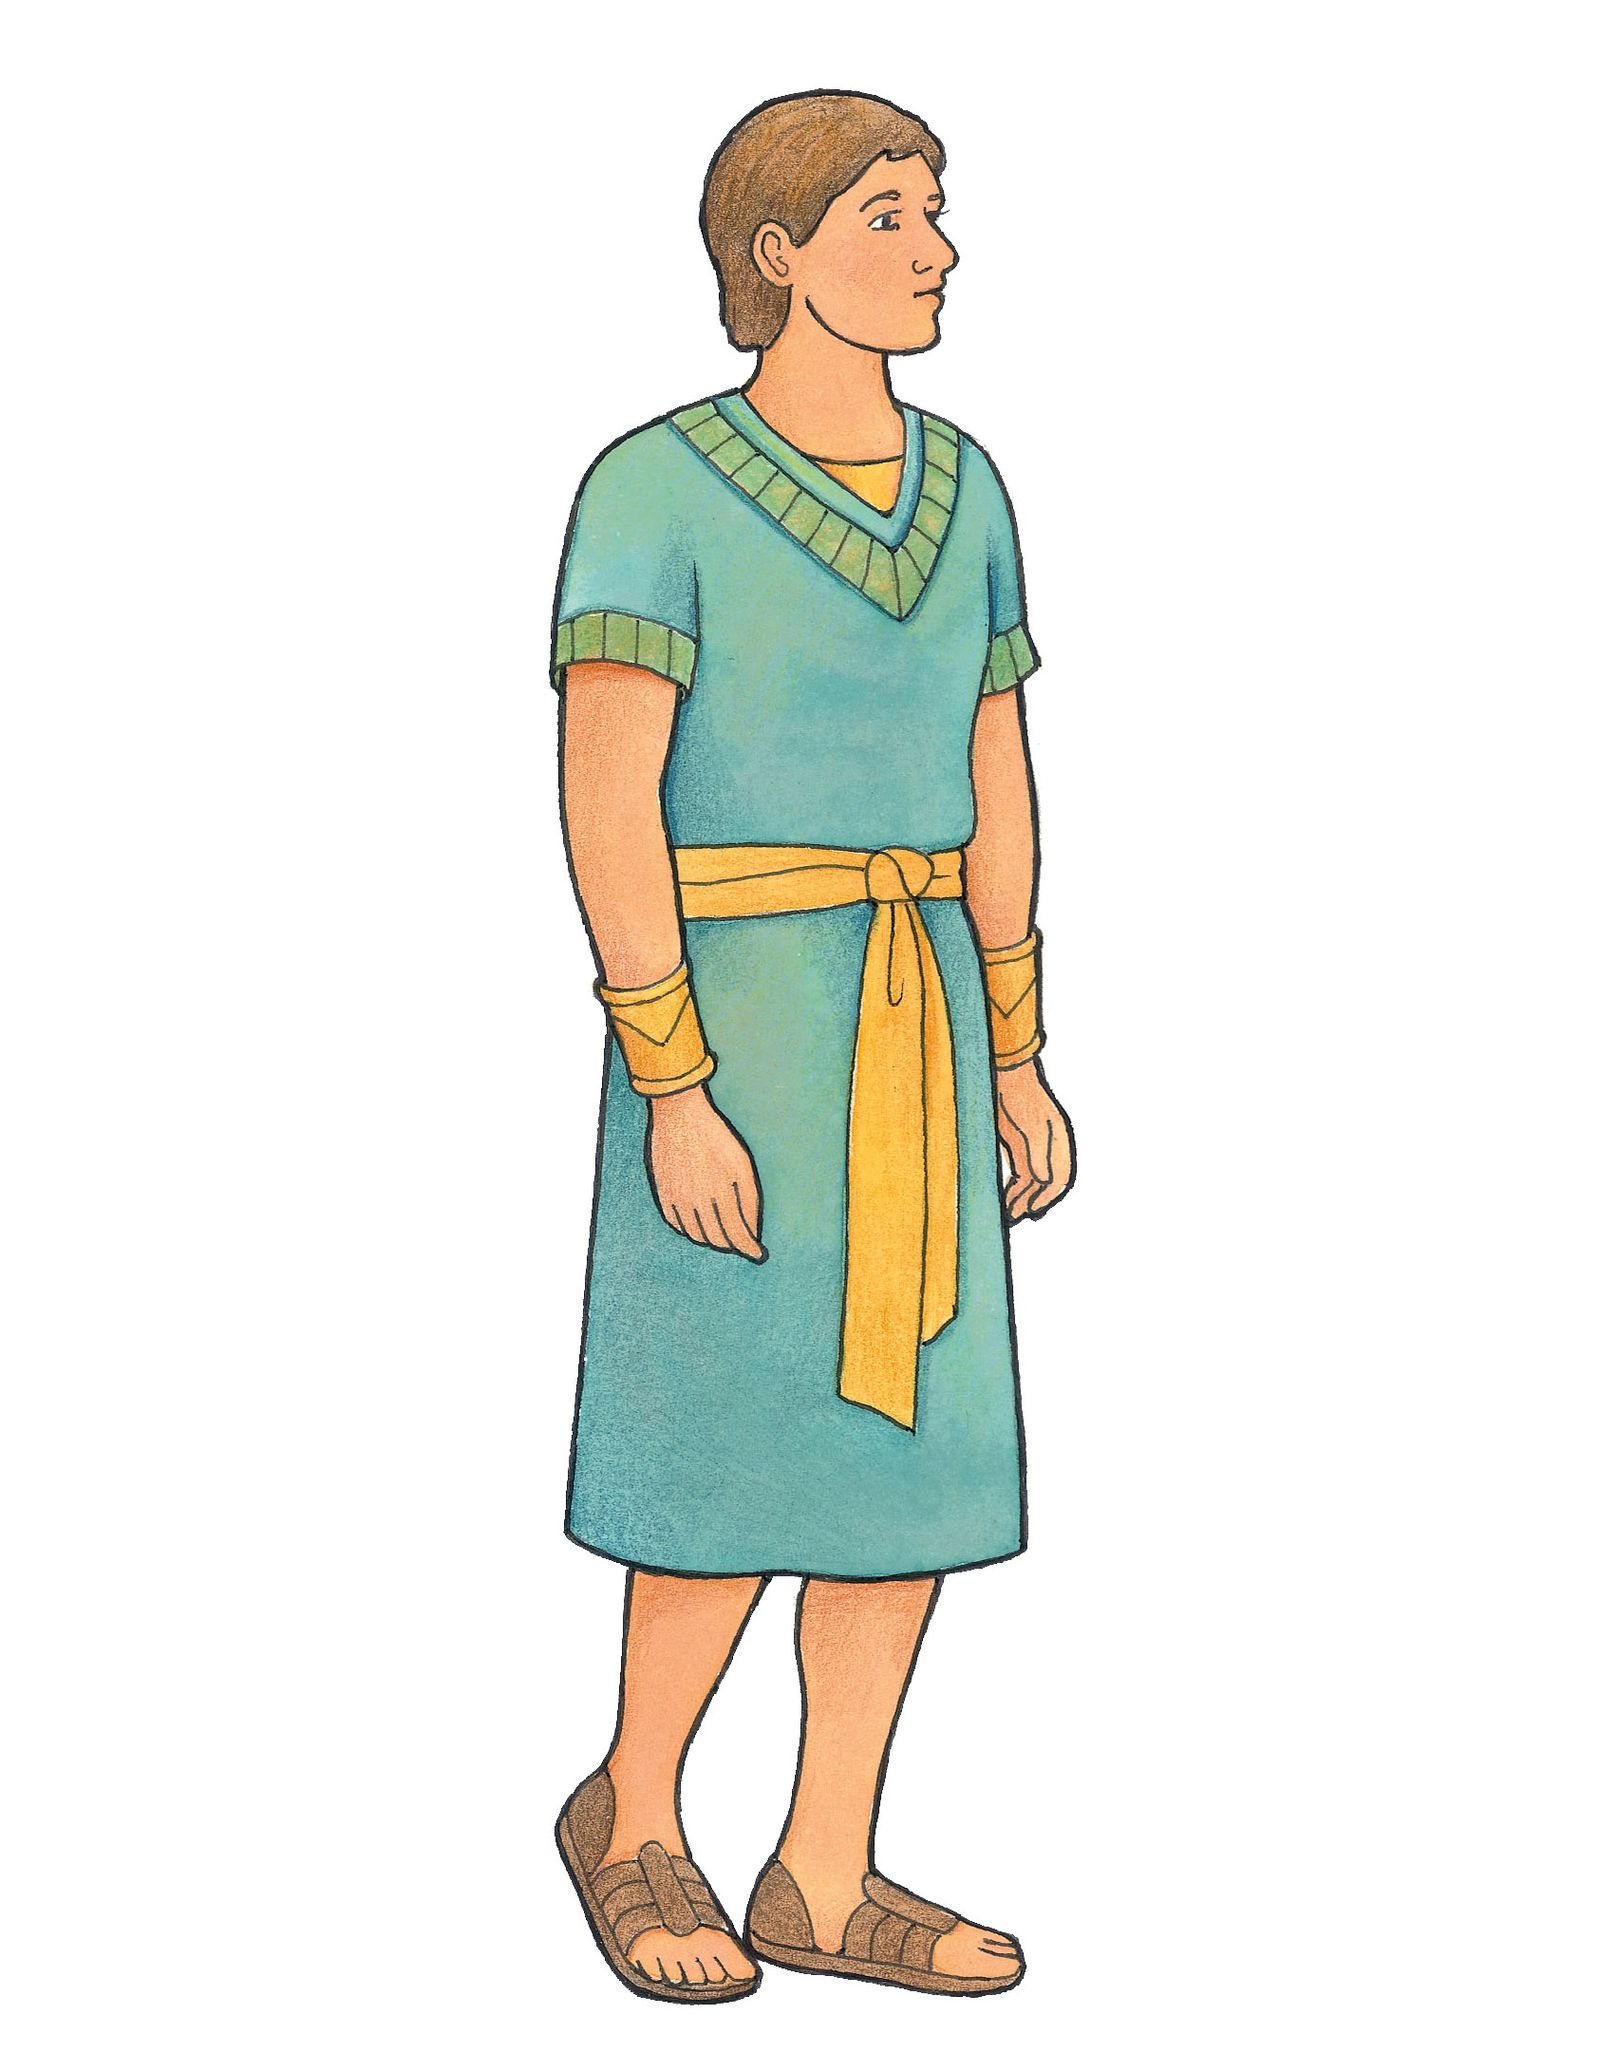 A character from the Book of Mormon dressed in traditional clothing.